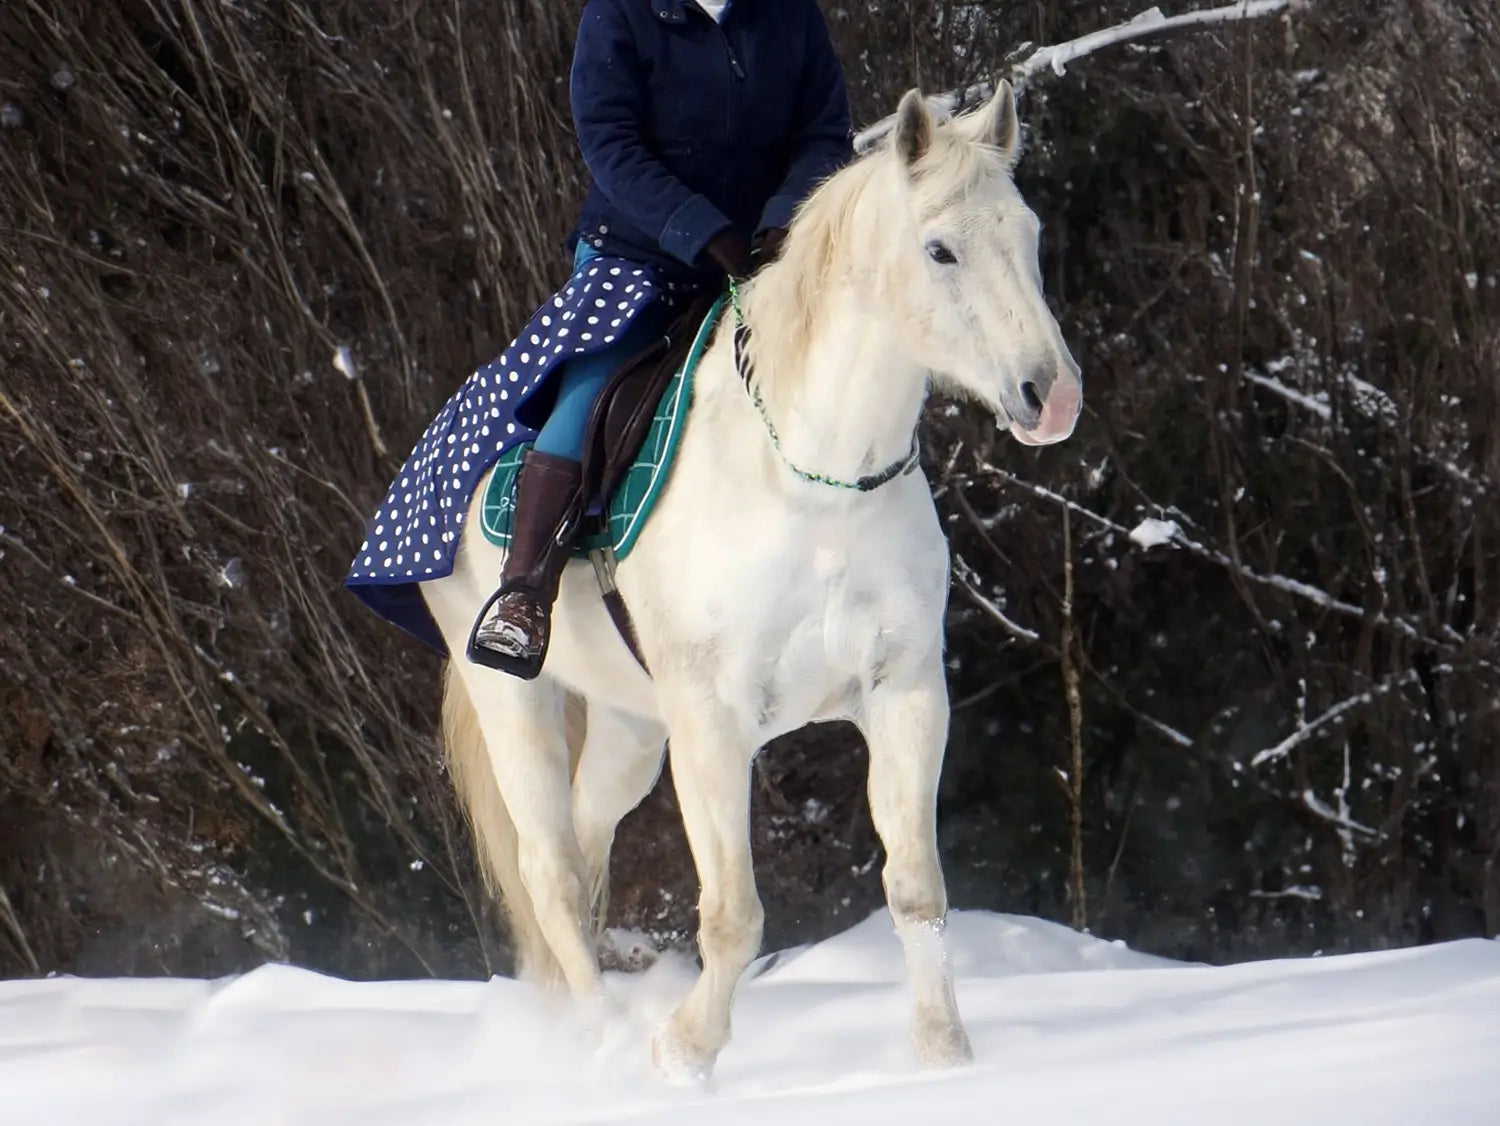 Customer's Gray Horse Riding in the Snow With a Polka Dot Quarter Sheet